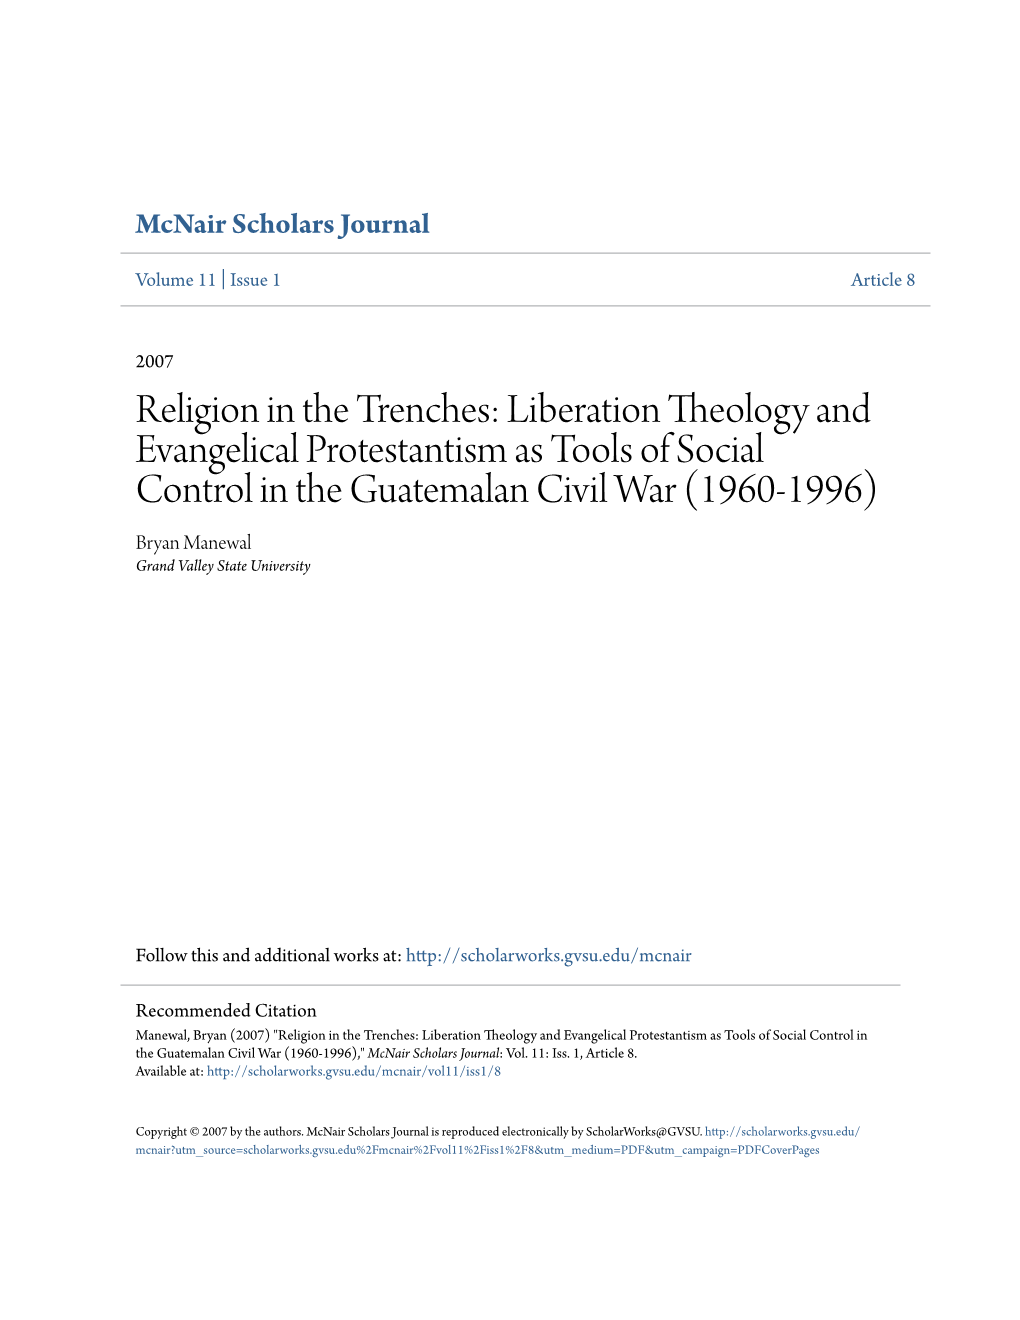 Liberation Theology and Evangelical Protestantism As Tools of Social Control in the Guatemalan Civil War (1960-1996) Bryan Manewal Grand Valley State University